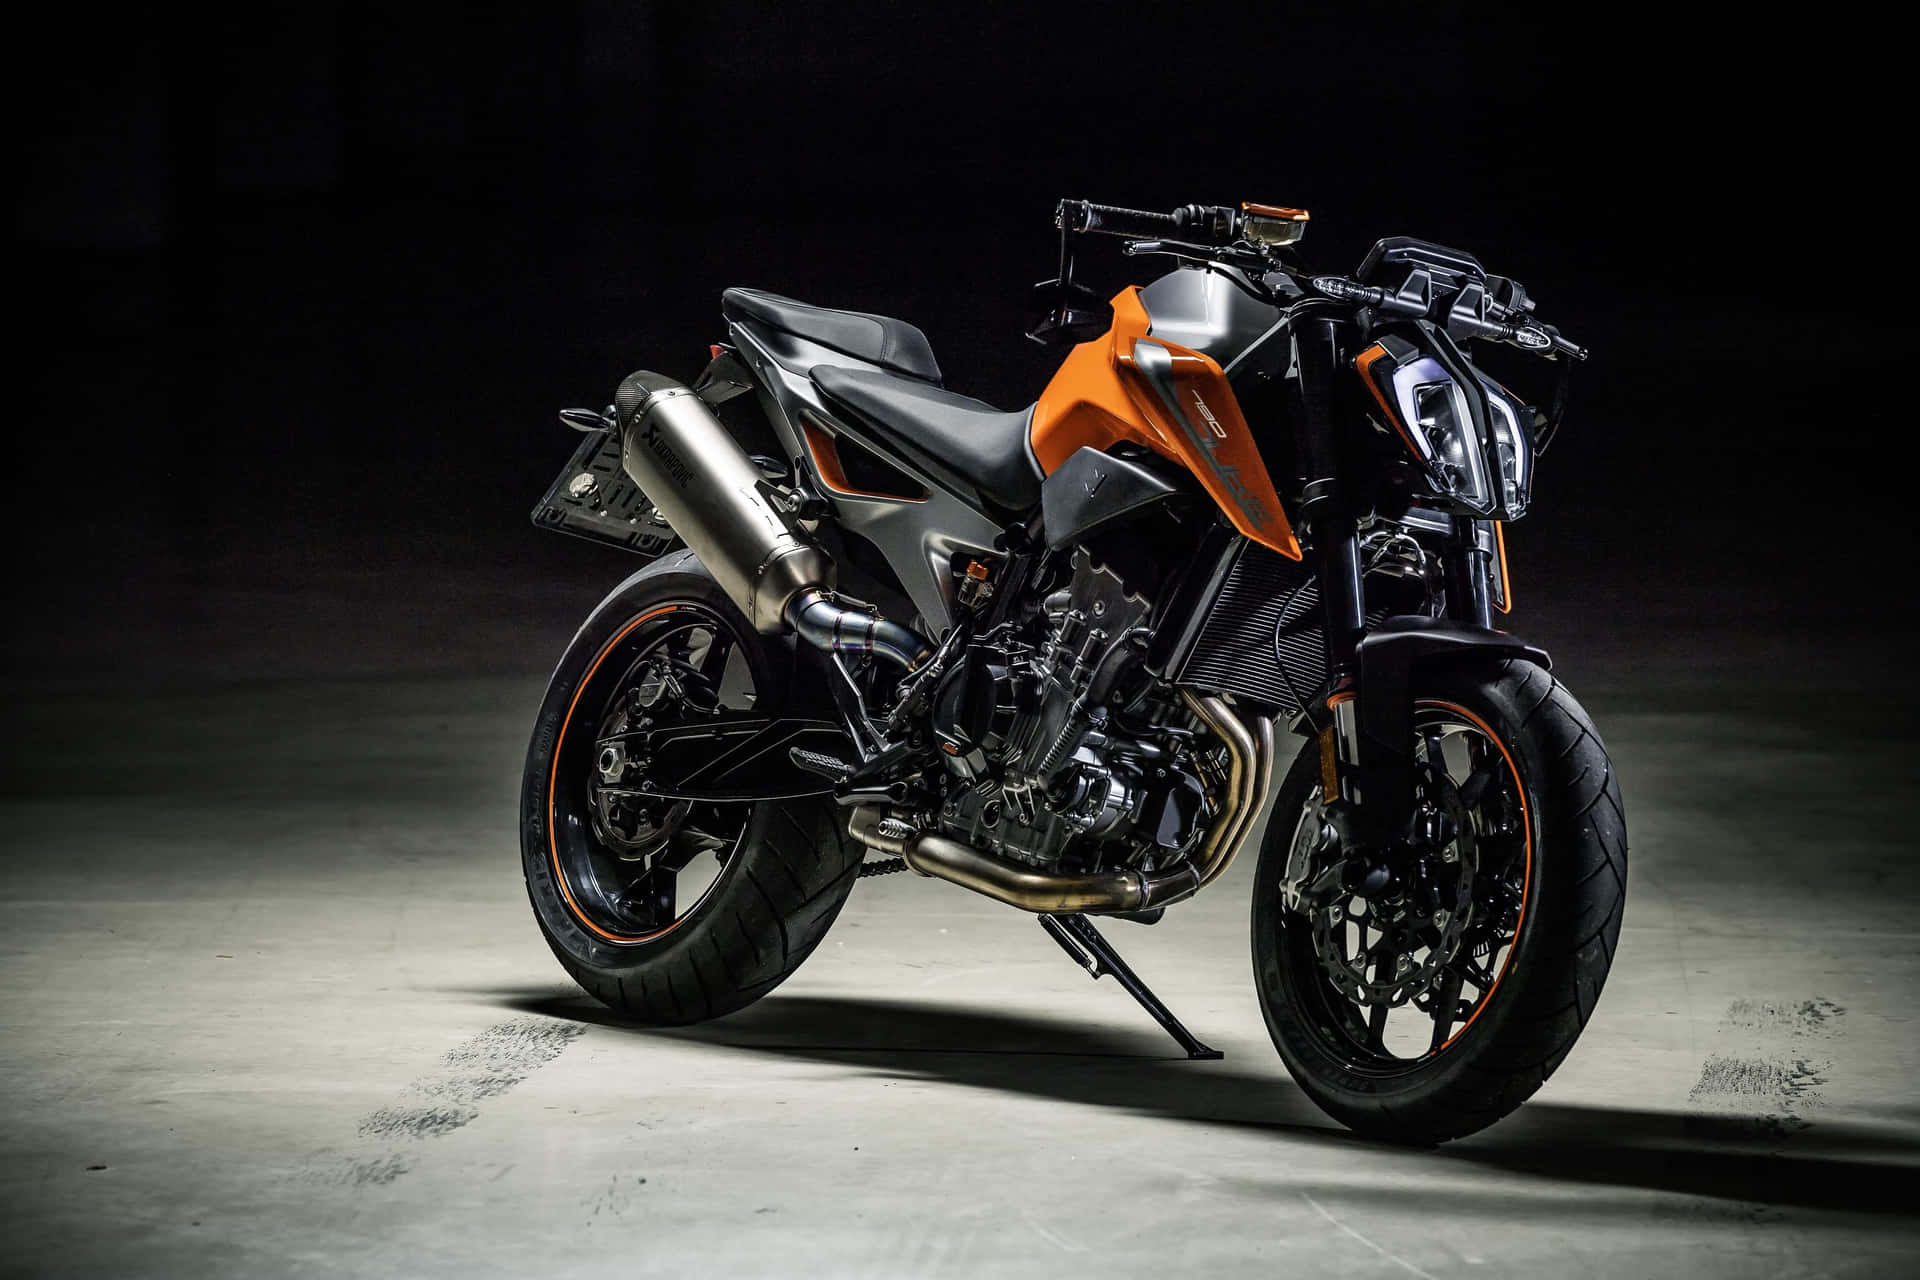 Ktm Bike – Ready for the Ride